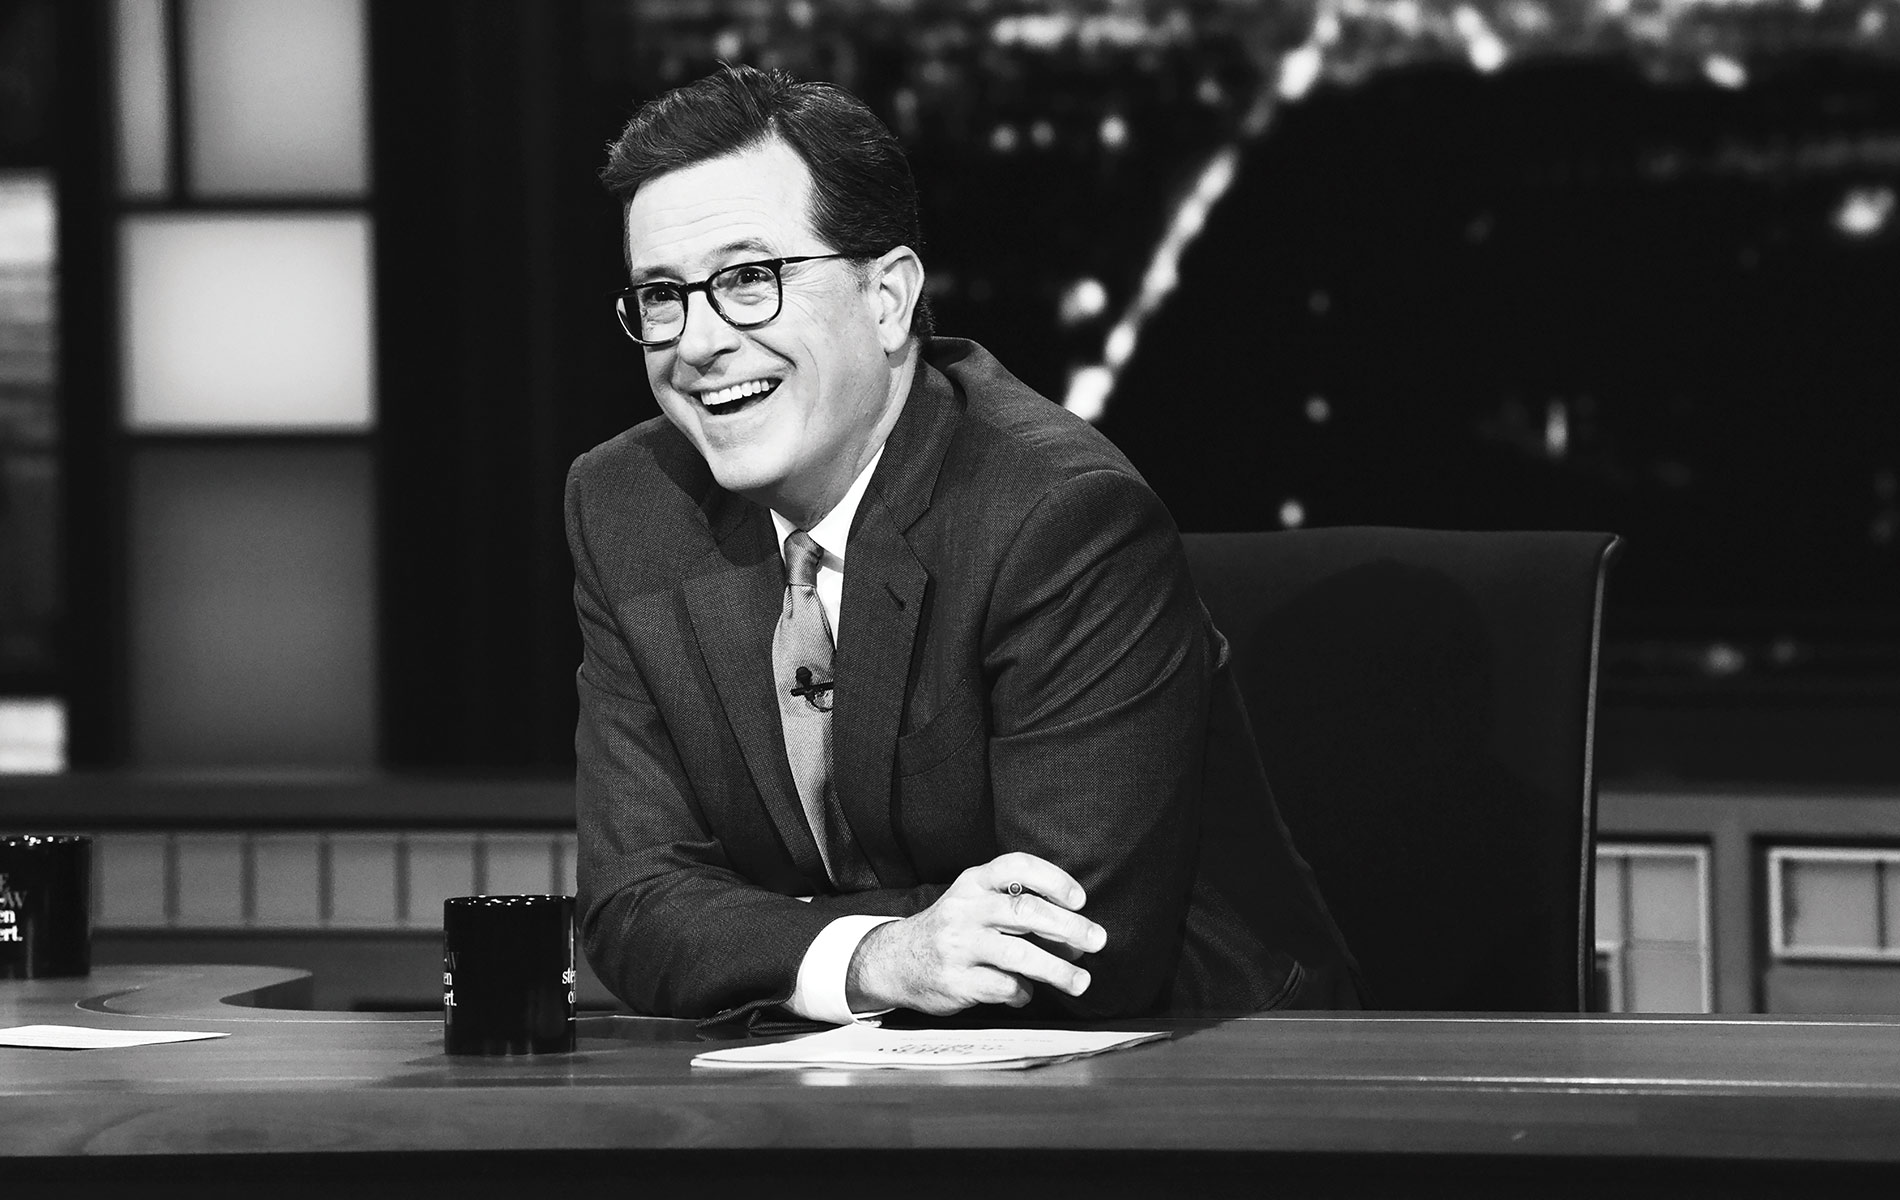 Stephen Colbert sitting on set for The Late Night Show with Stephen Colbert. VIE Magazine - The Entertainer Issue March 2018